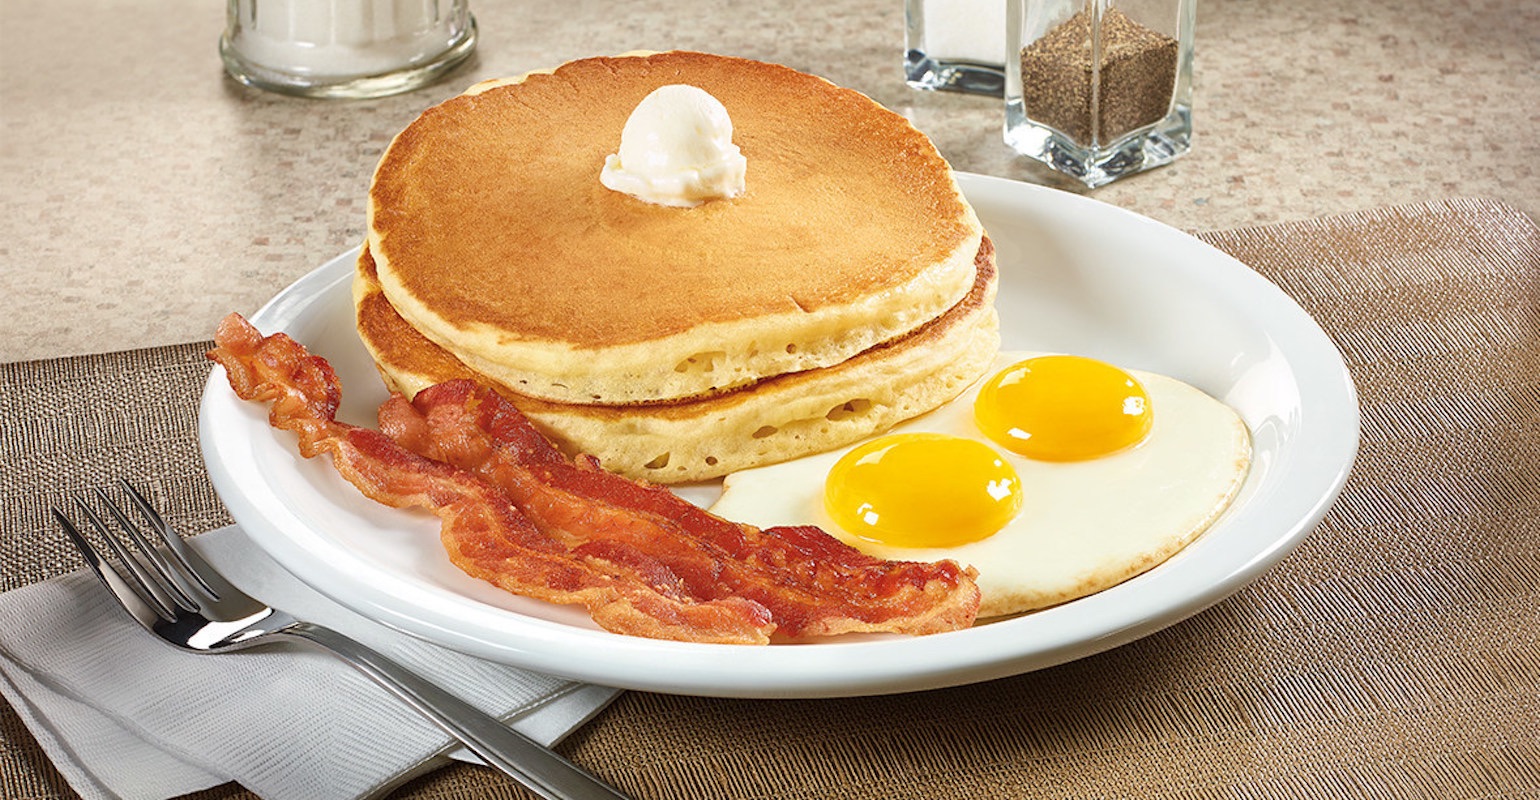 Updated Denny's Menu Prices + Discounts You Can Use (2023)